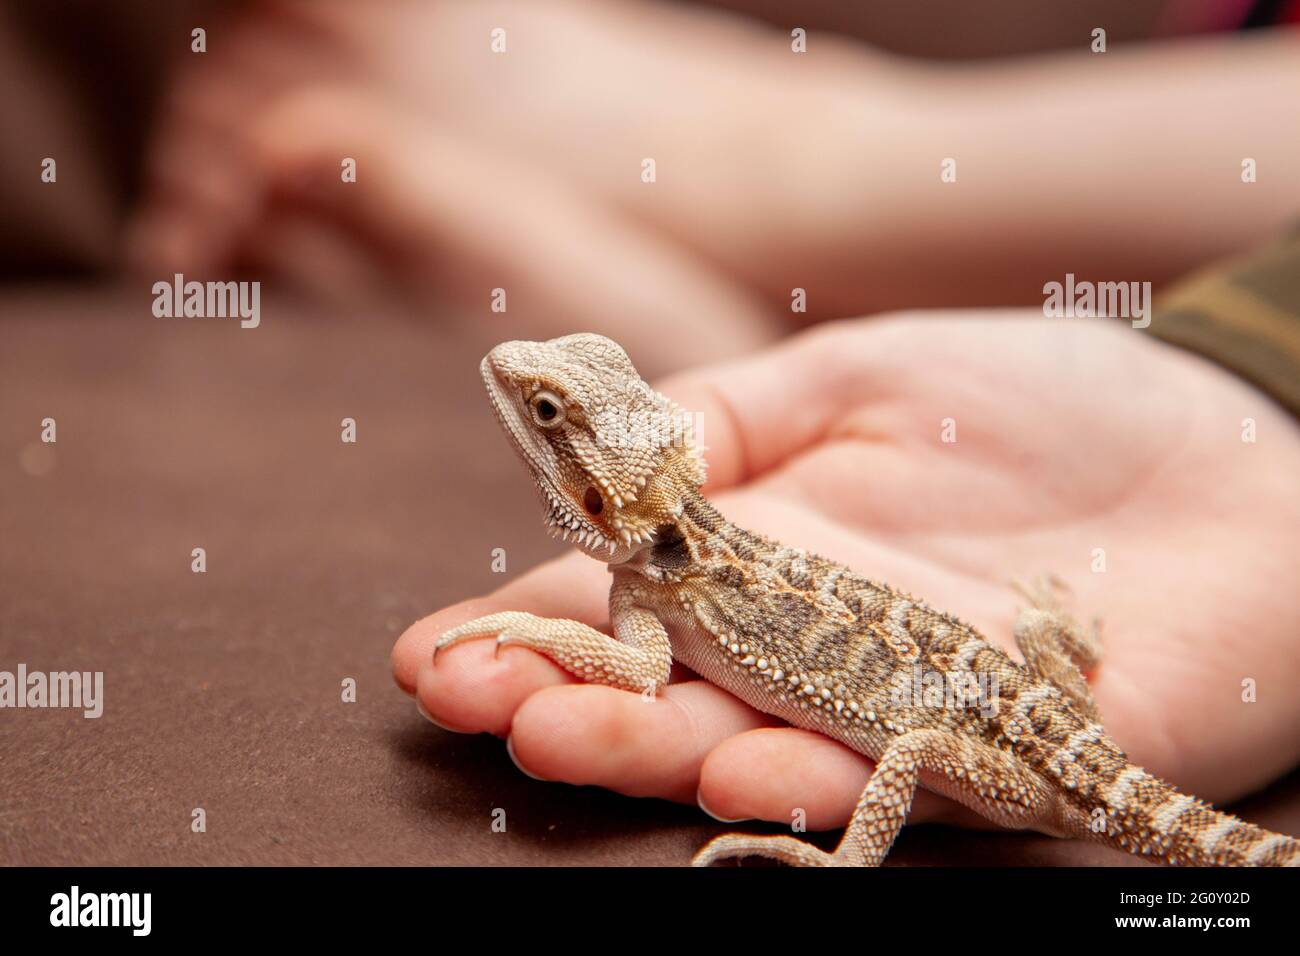 a domesticated bearded dragon who is still young poses on someone's hand as a pet Stock Photo